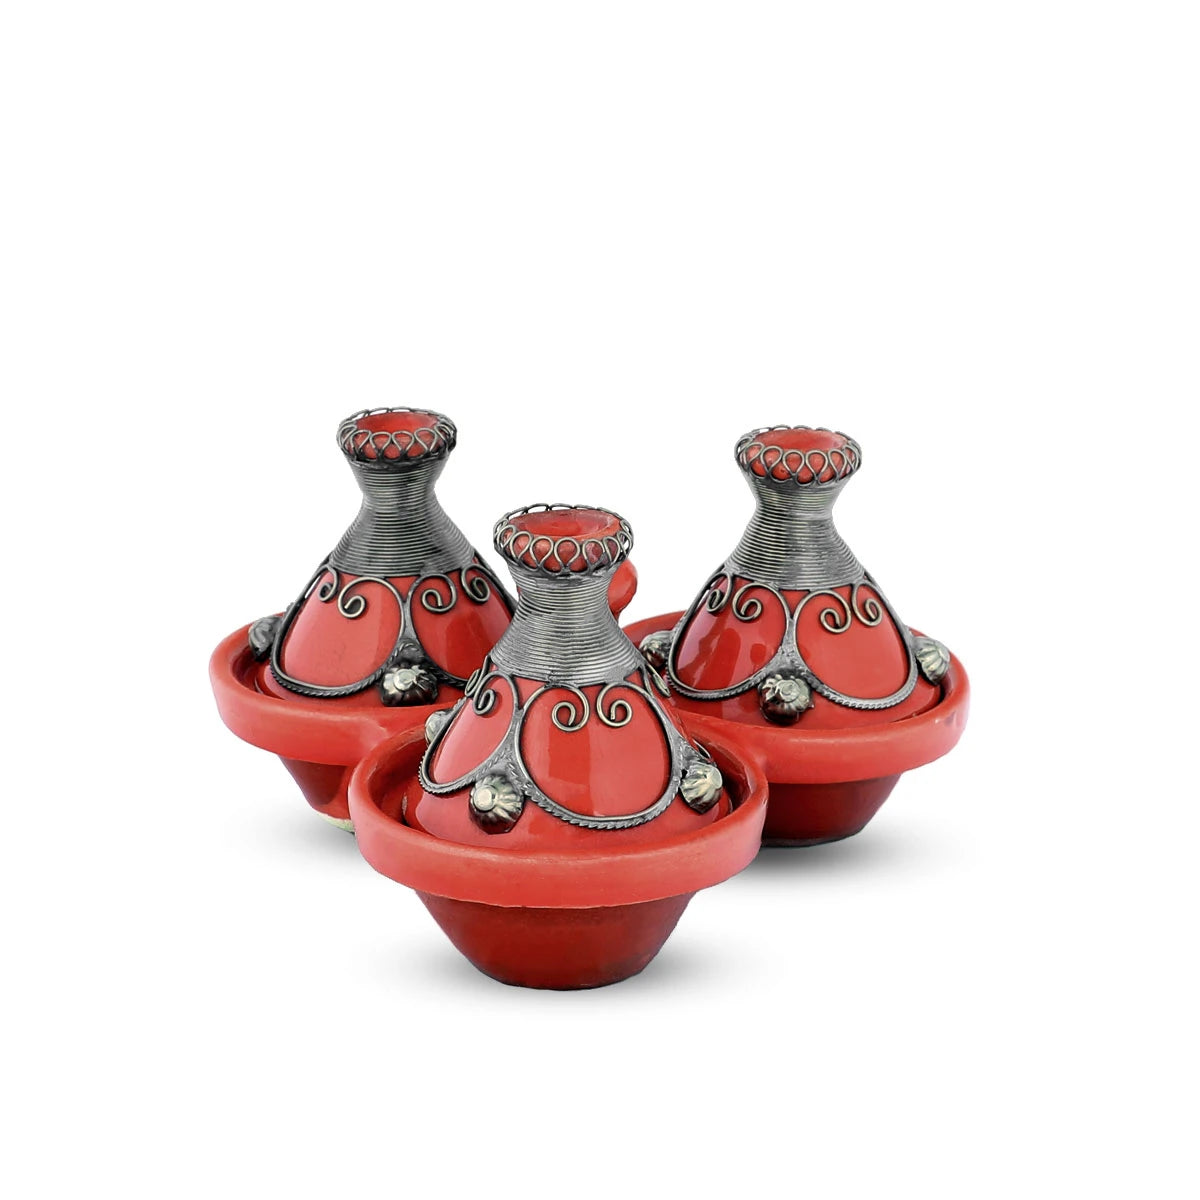 Flat View of Red Colored Three Moroccan Tagine Set with closed lids